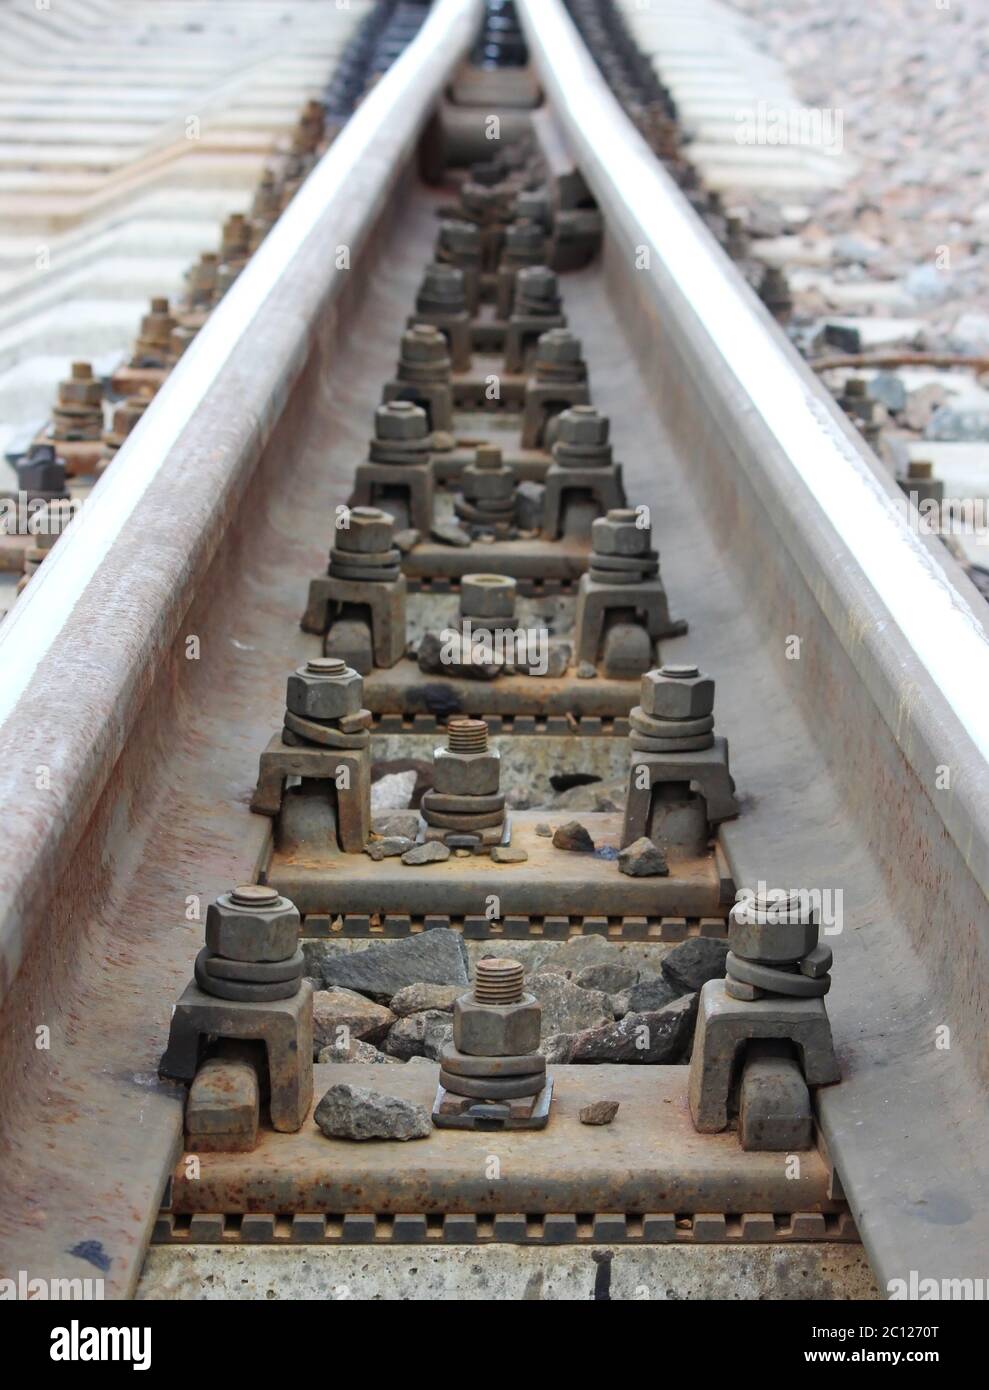 bolts that secure the rails to the sleepers on the railway direction. Stock Photo